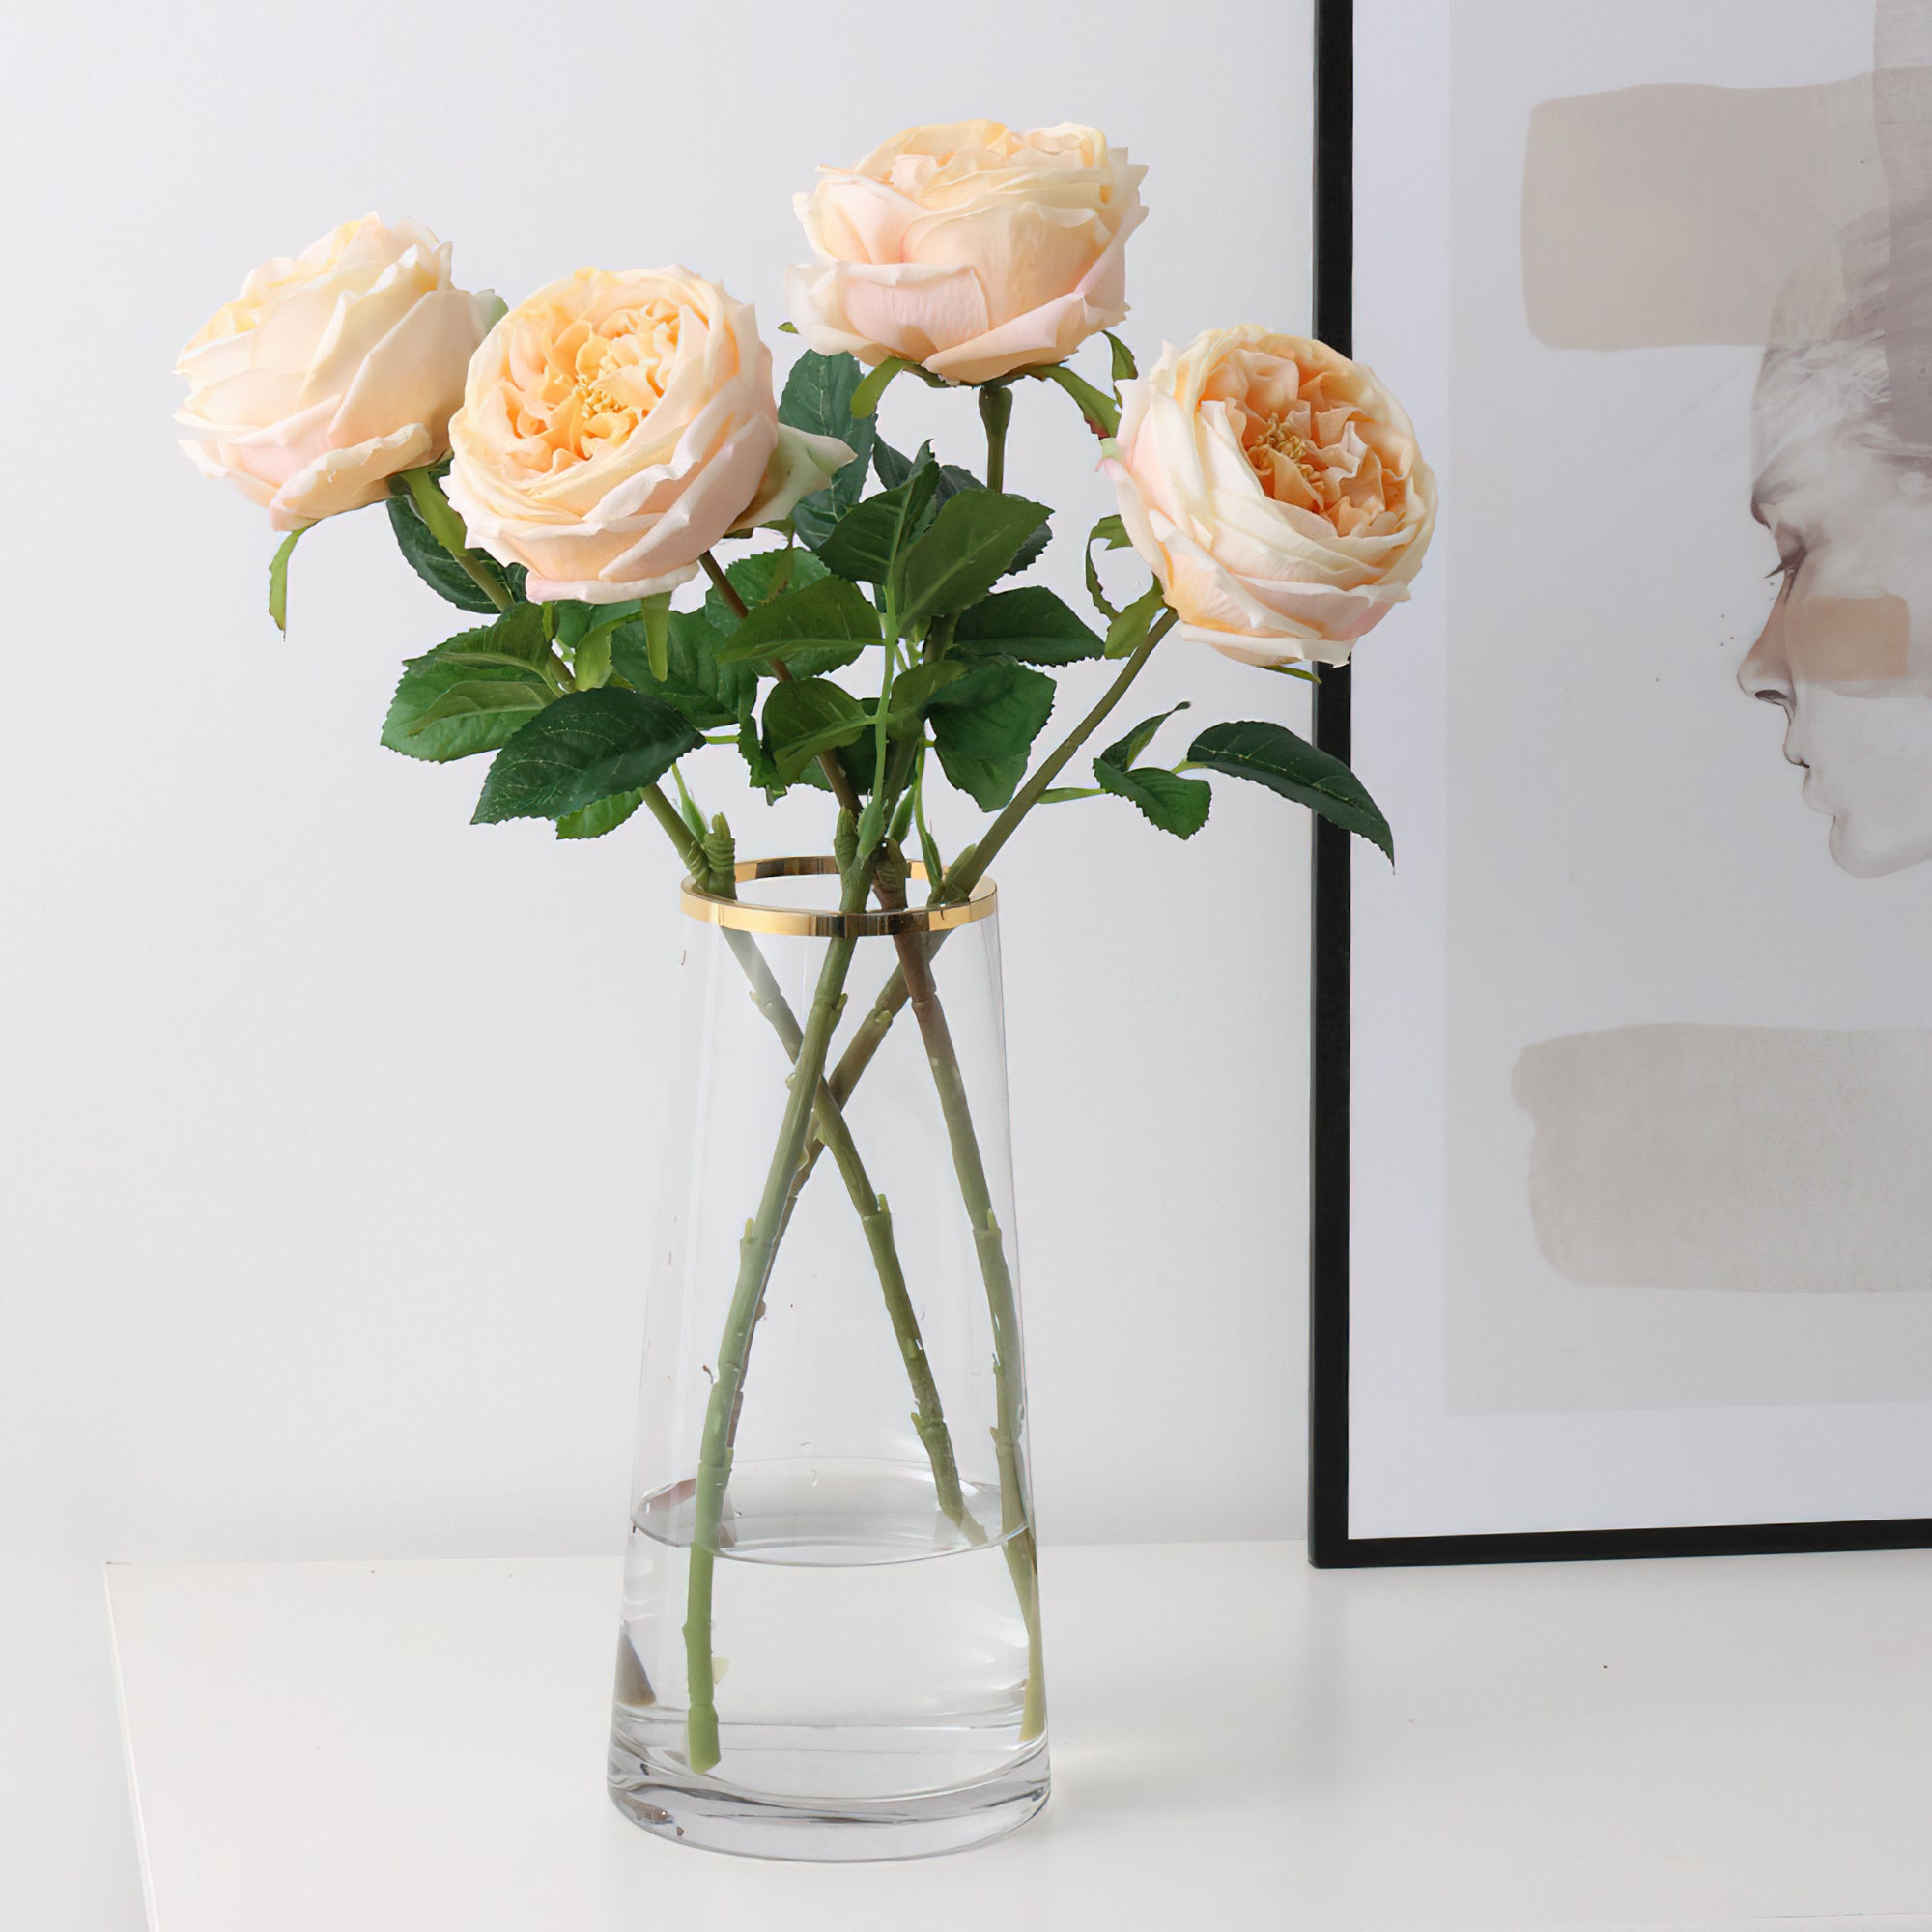 Luxurious Austin Rose Artificial Bouquet - Realistic Silk Flowers for Wedding Decor & Photographic Props - Ideal for Table Settings & Gifts